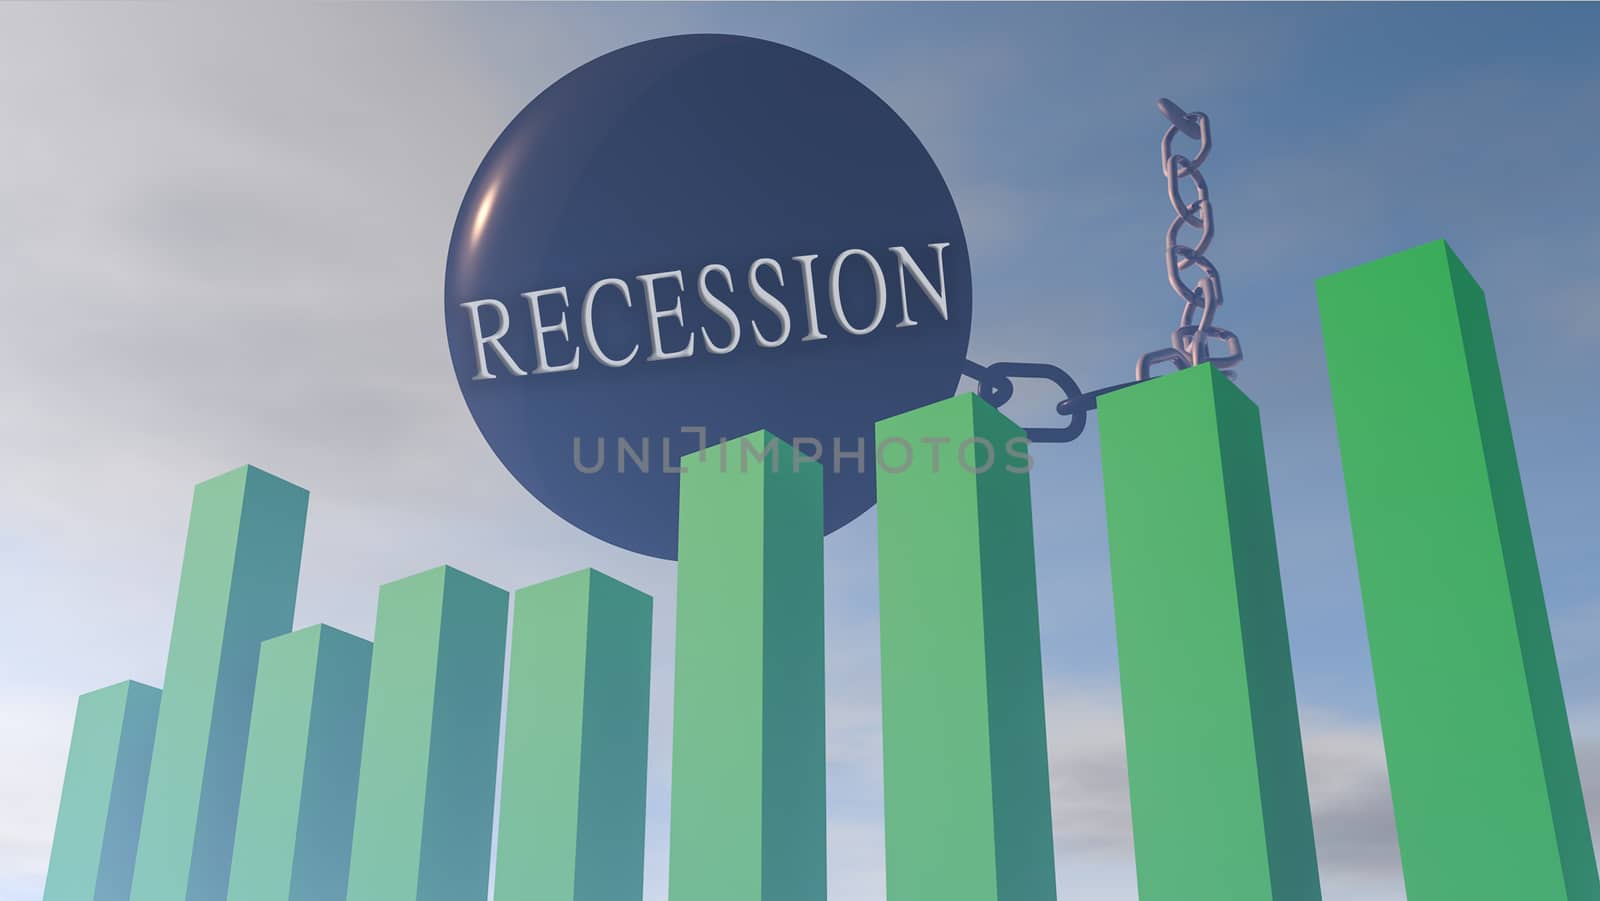 Ffinancial stock market influenced by recession by HD_premium_shots